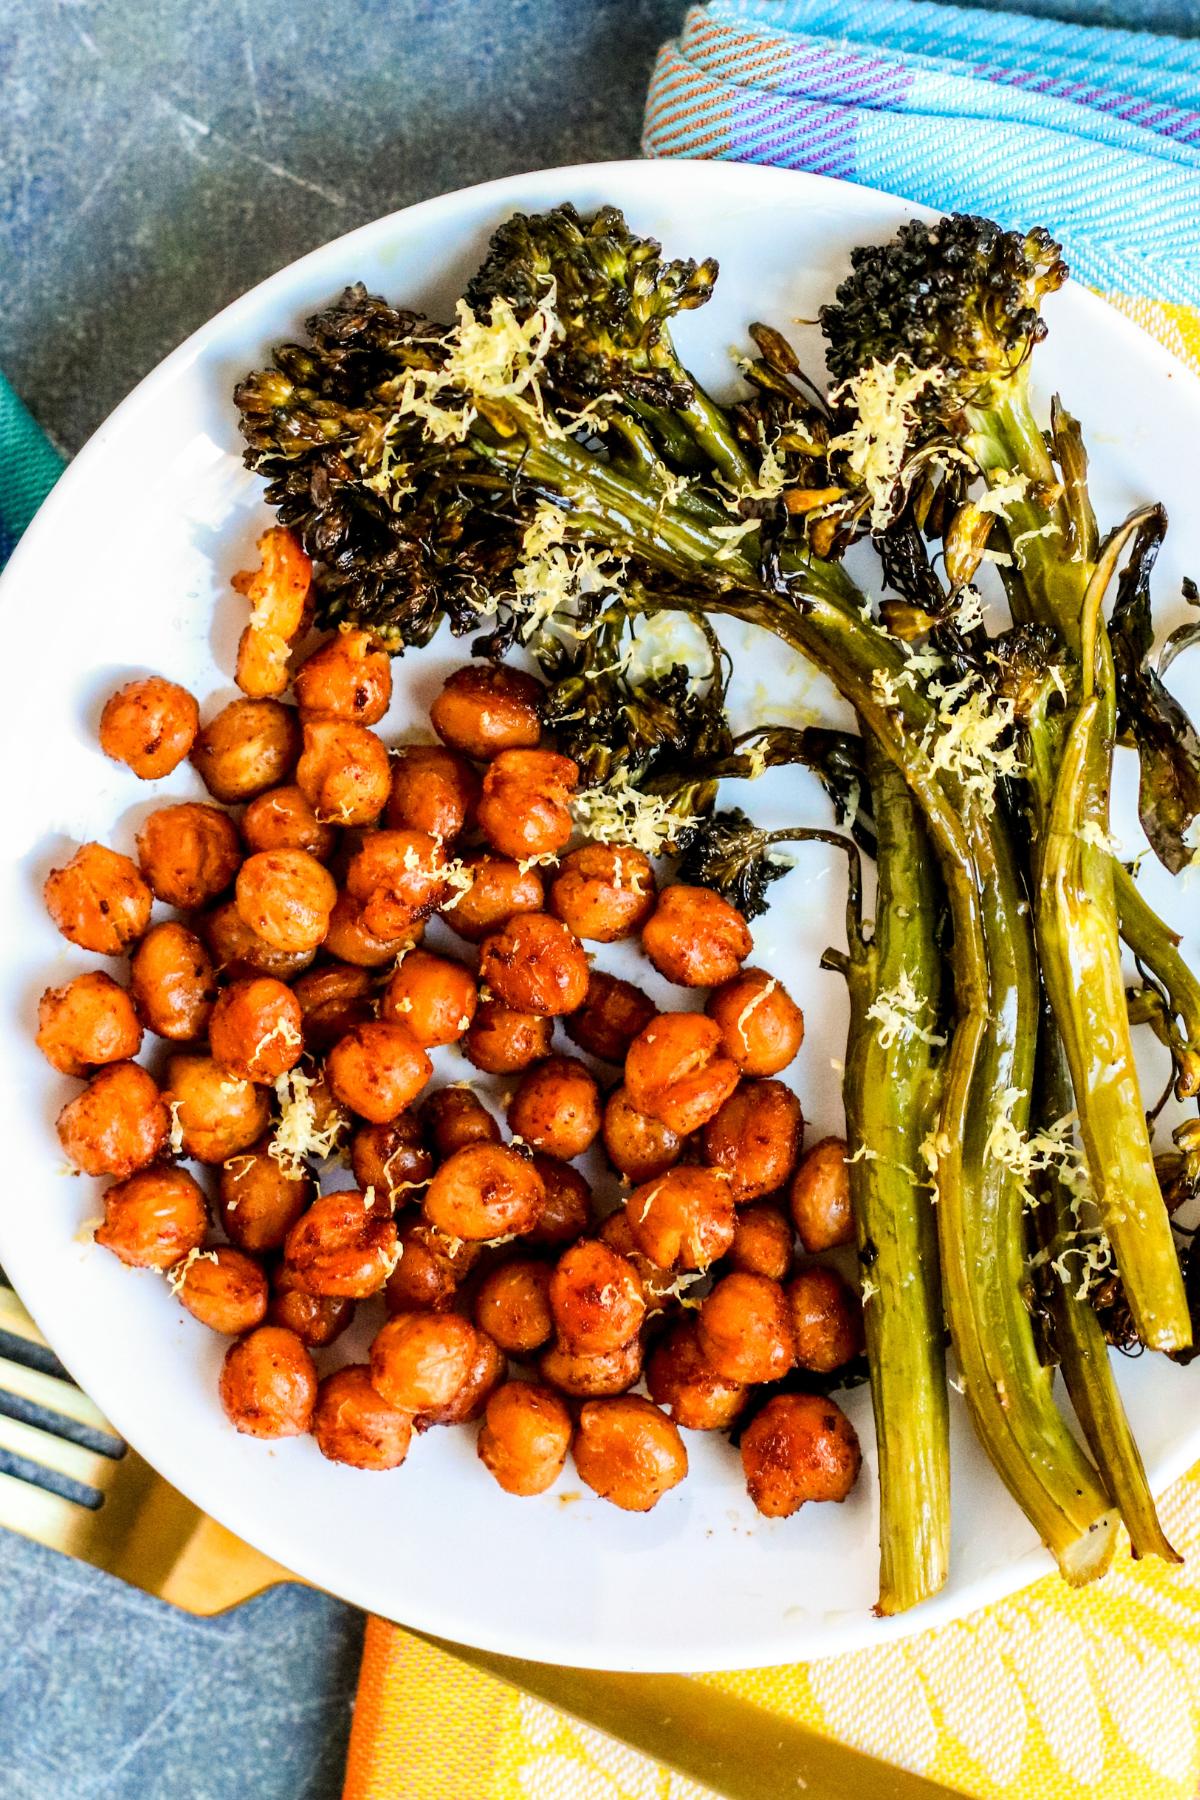 Dinner plate with roasted chickpeas and broccolini.